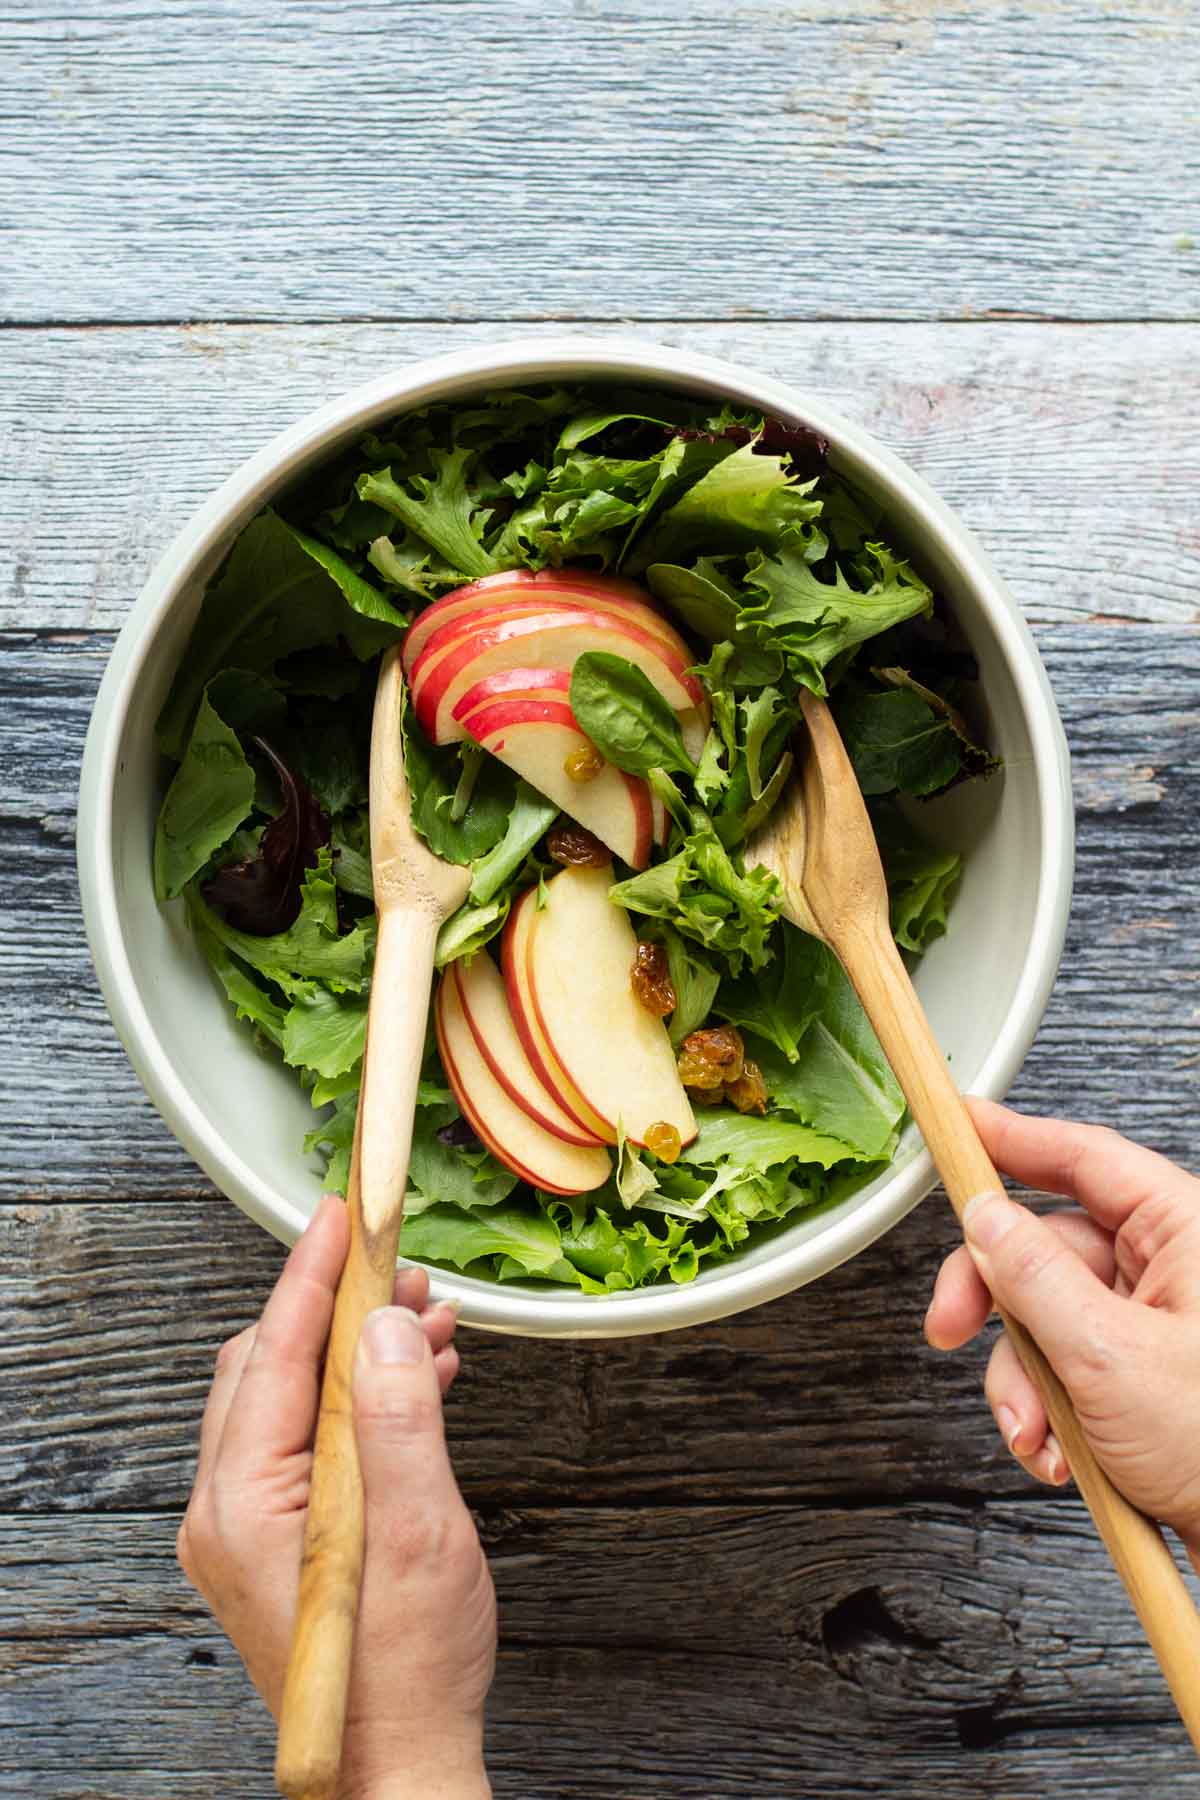 Two hands with wooden spoons mixing apples into a salad in a bowl